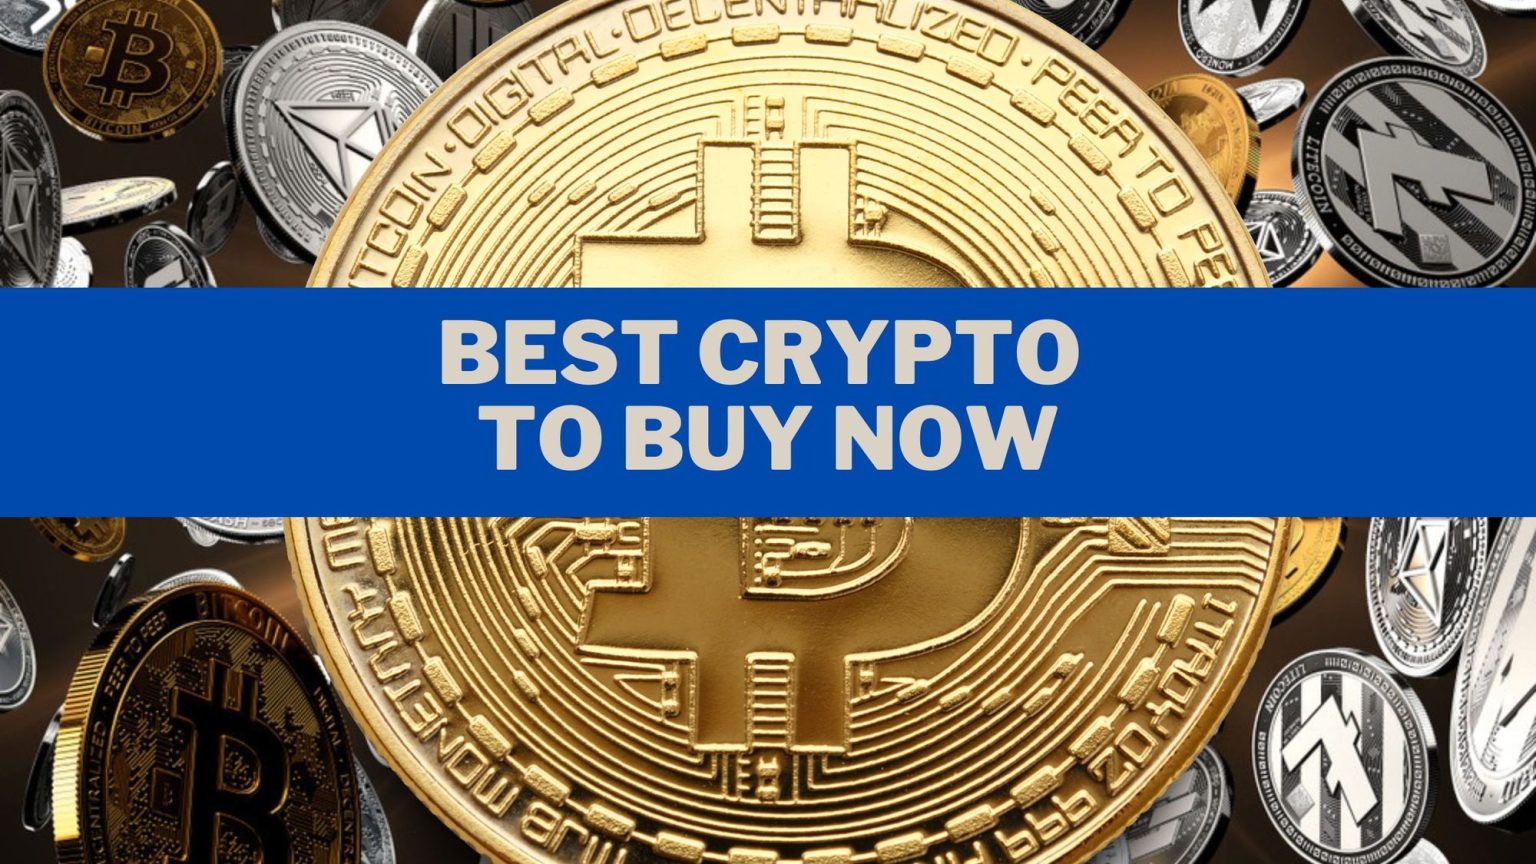 5 Best Crypto To Buy Today or Long-Term: Best Crypto To Buy Today